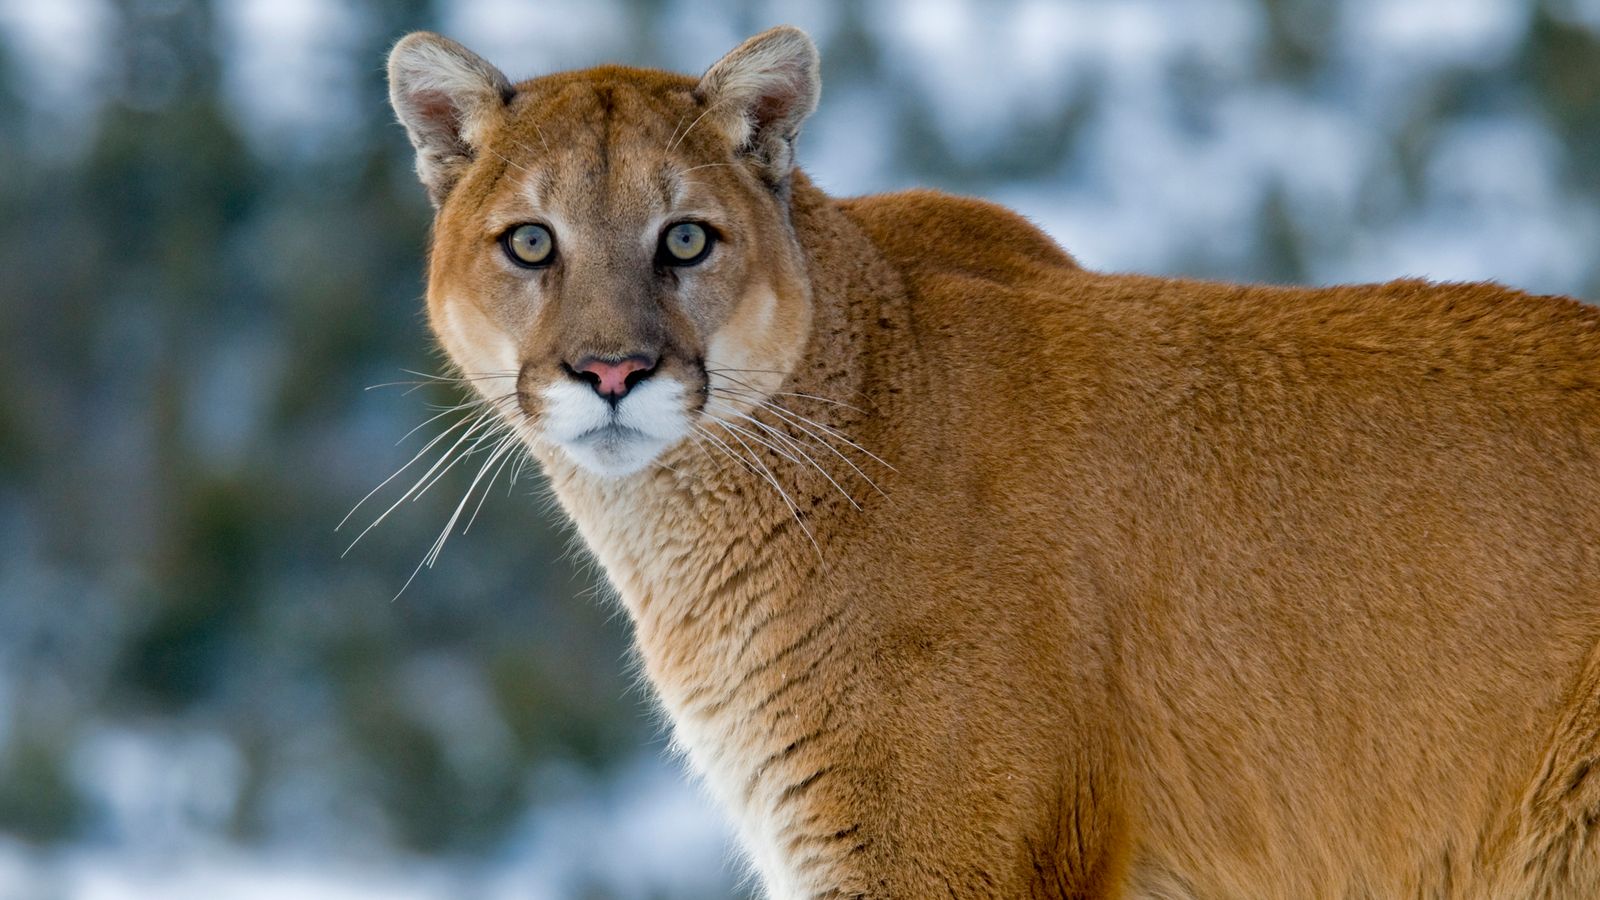 'Heroic' cyclists fight off cougar after it grabbed woman in its jaws in Washington state, US